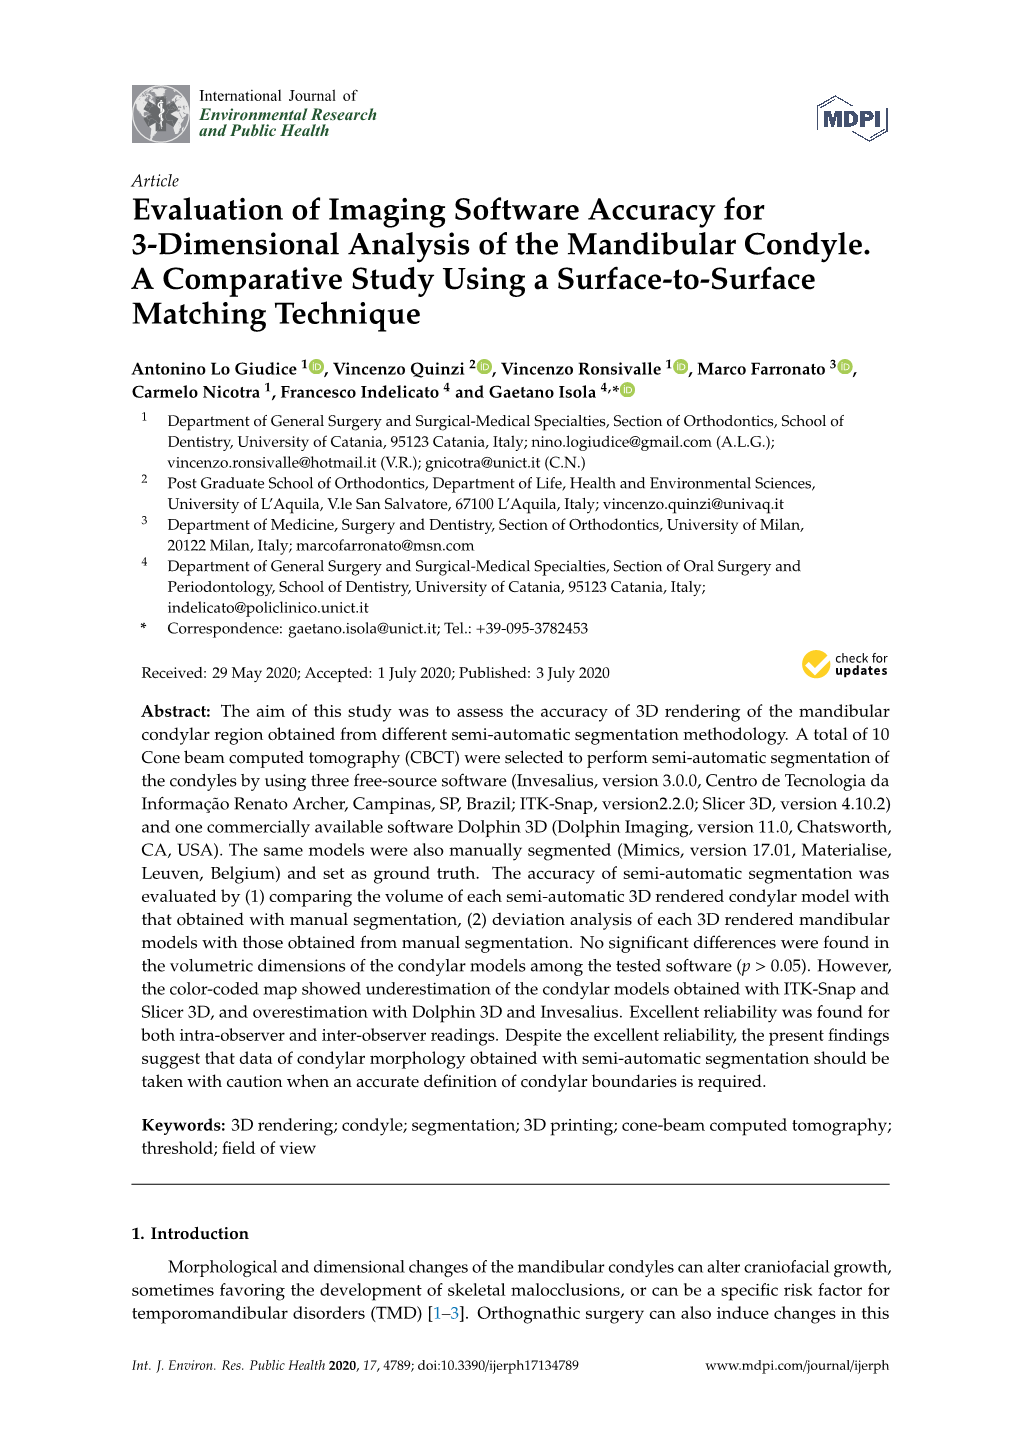 Evaluation of Imaging Software Accuracy for 3-Dimensional Analysis of the Mandibular Condyle